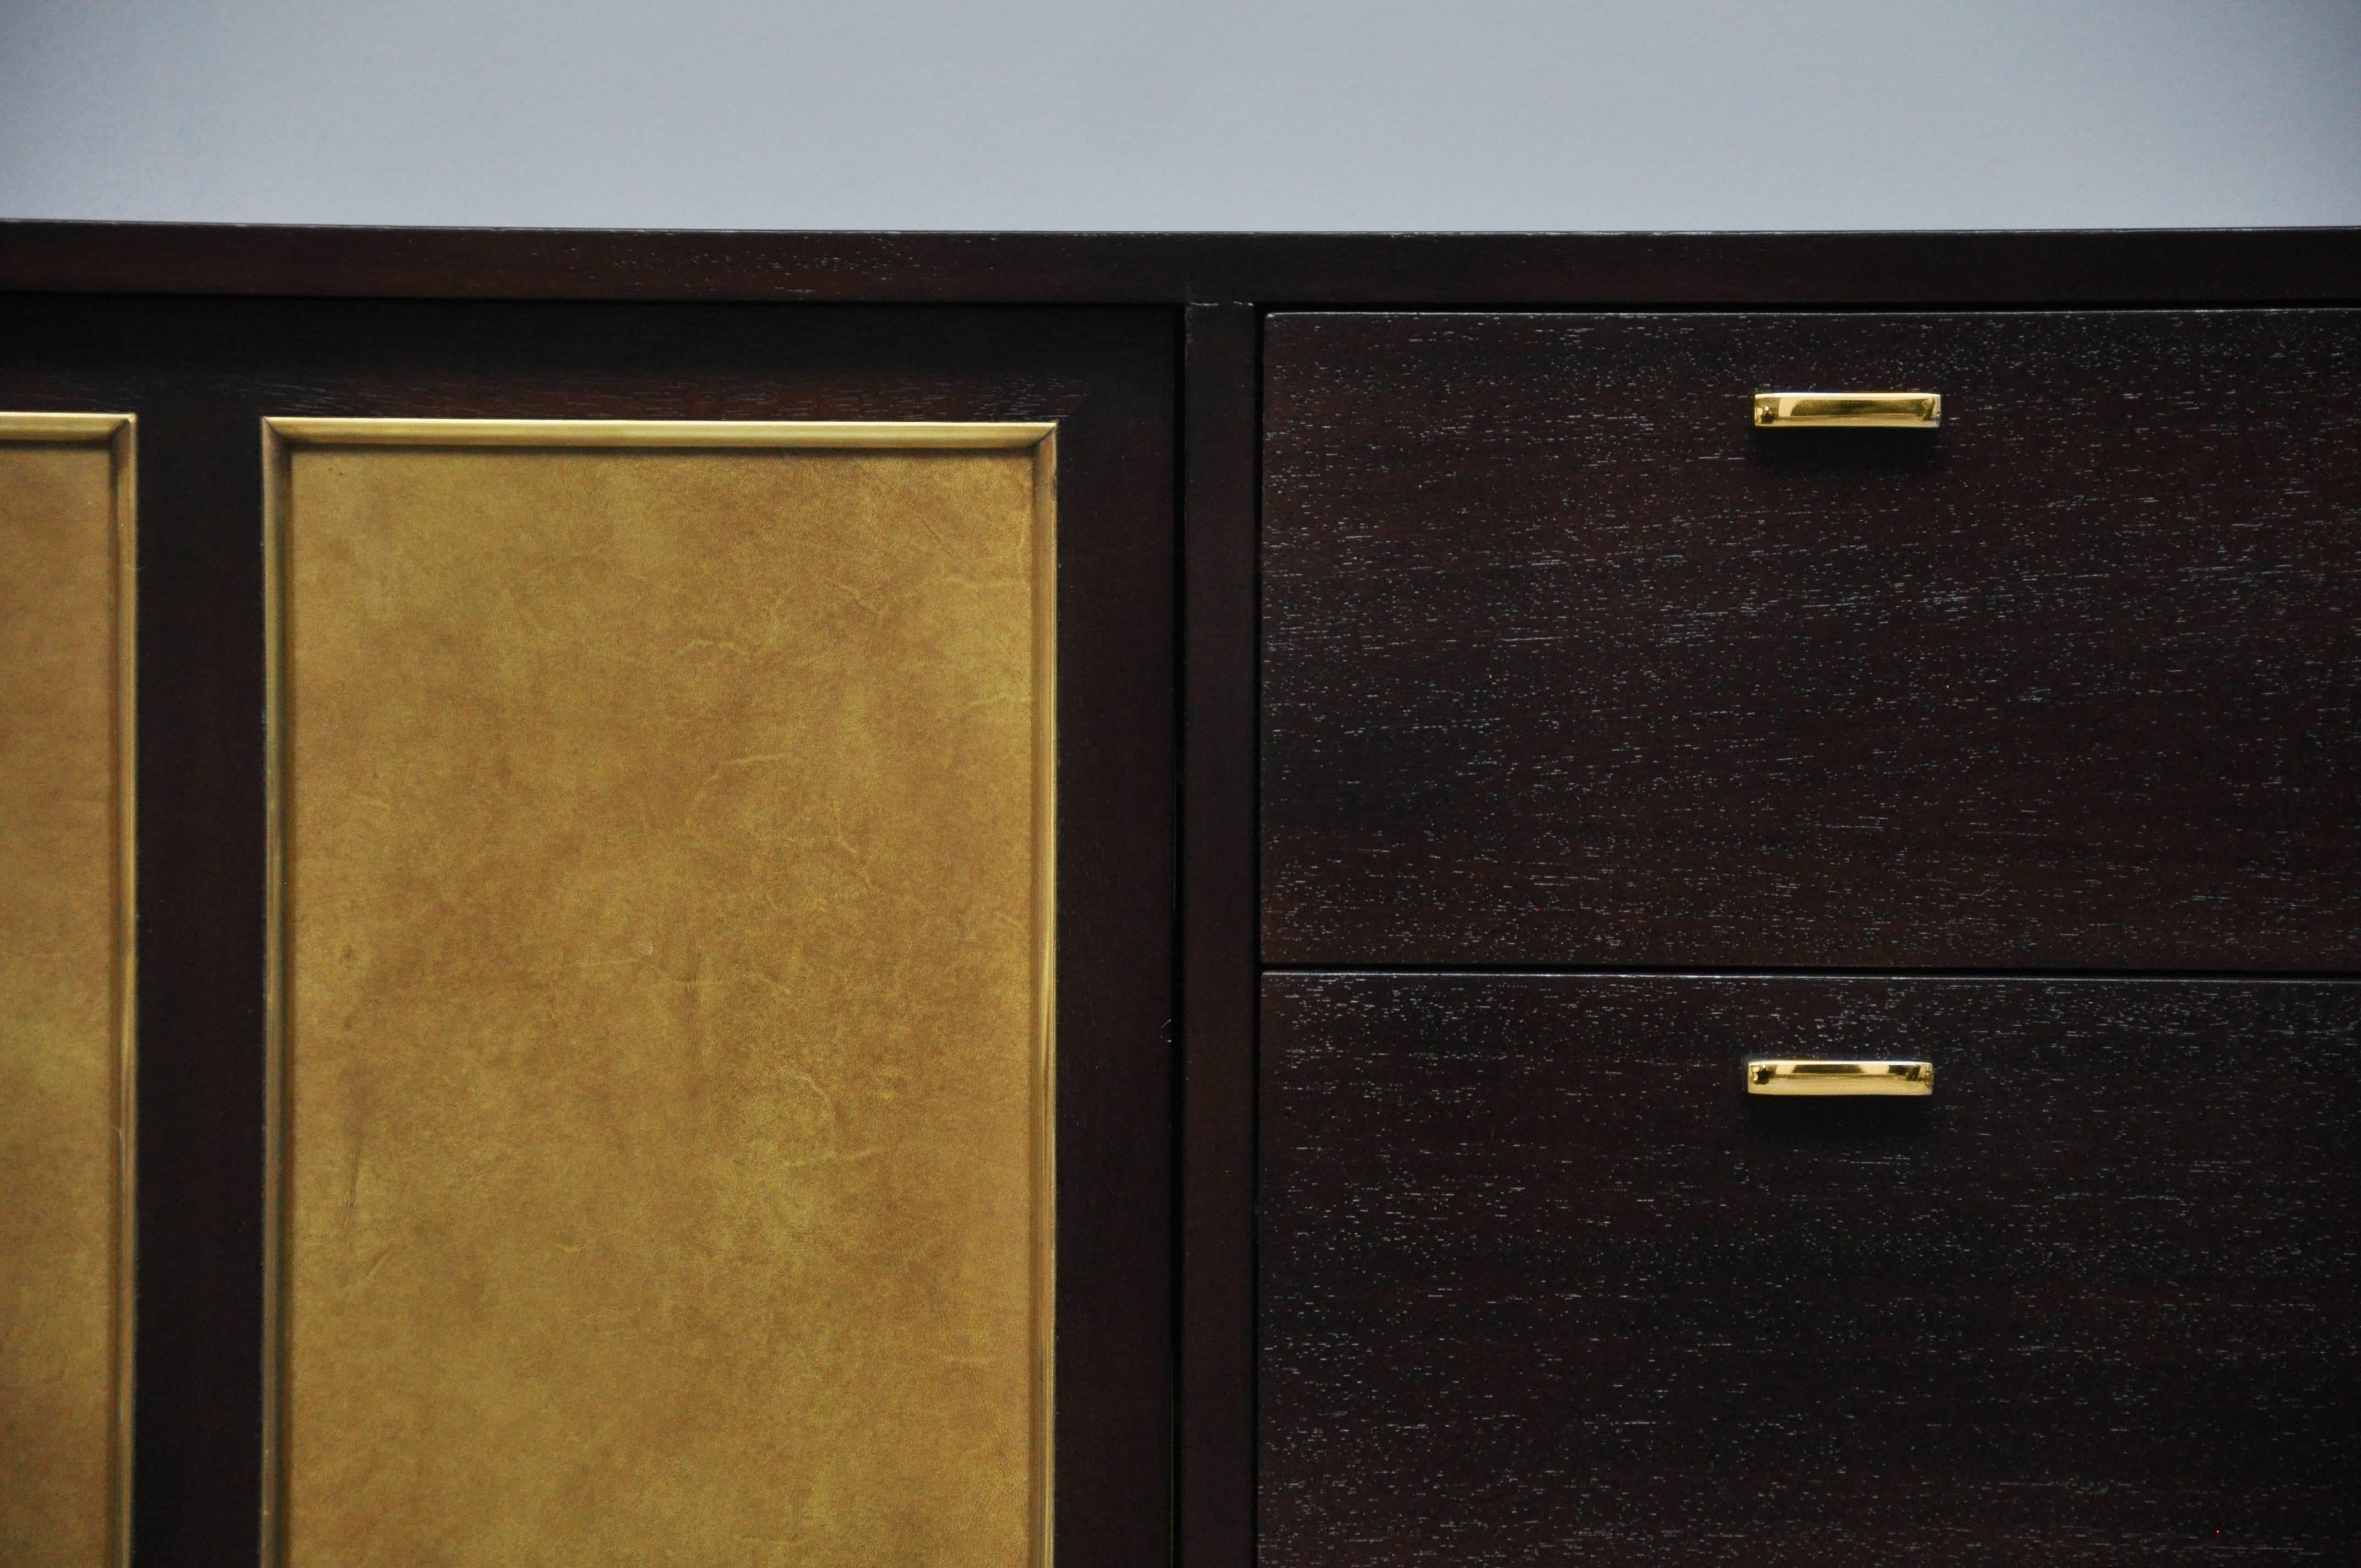 Long credenza by Harvey Probber. Fully restored. Refinished in espresso tone with original goldenrod aluminum doors.